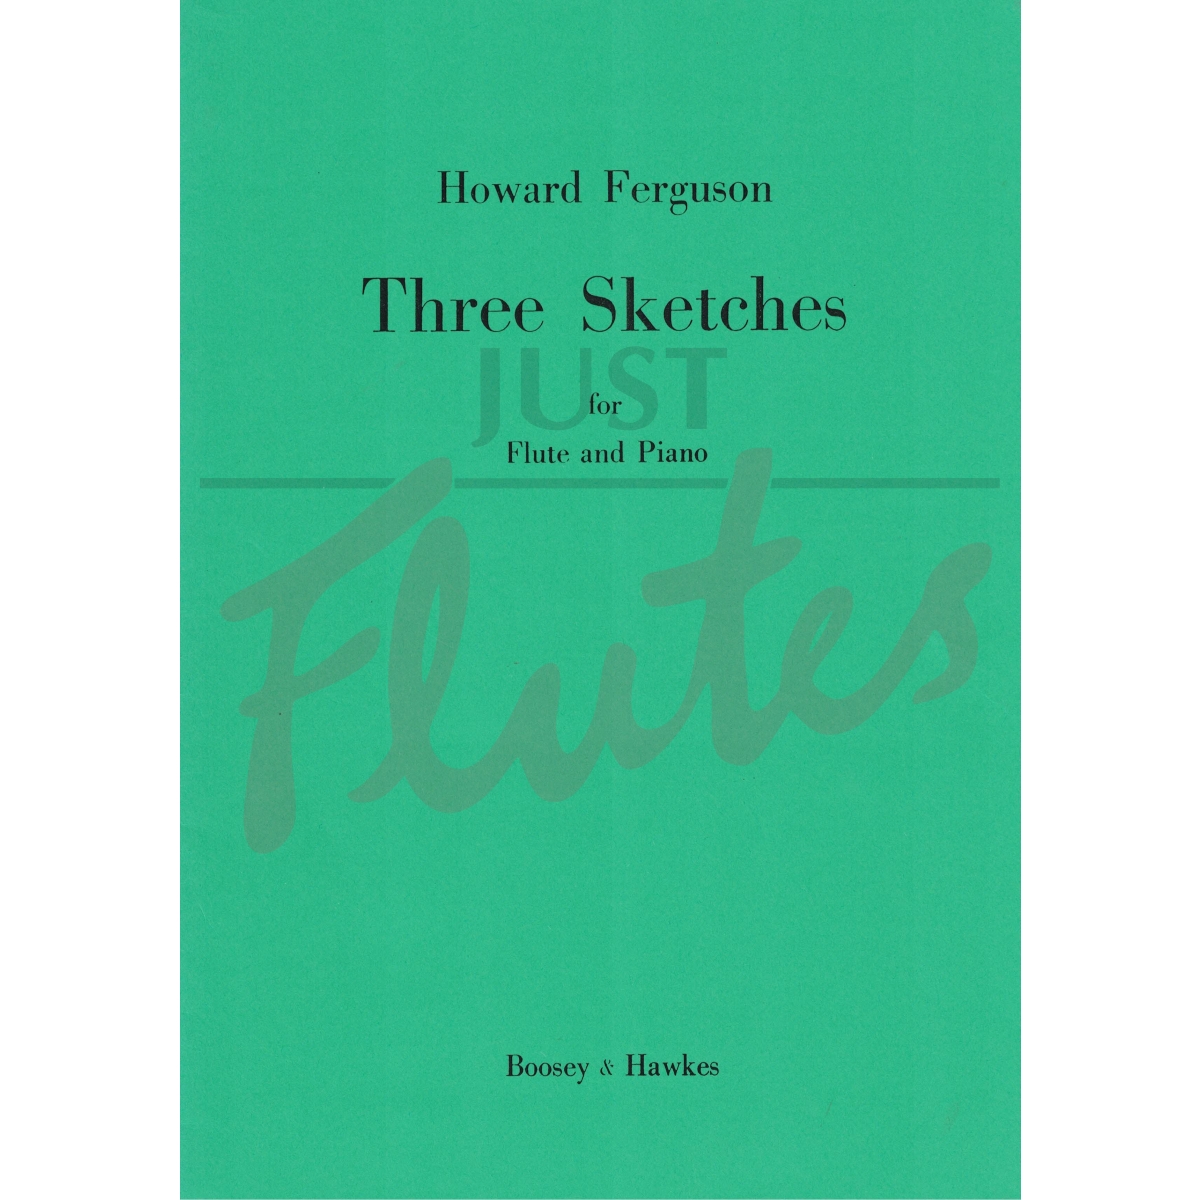 Three Sketches for Flute and Piano